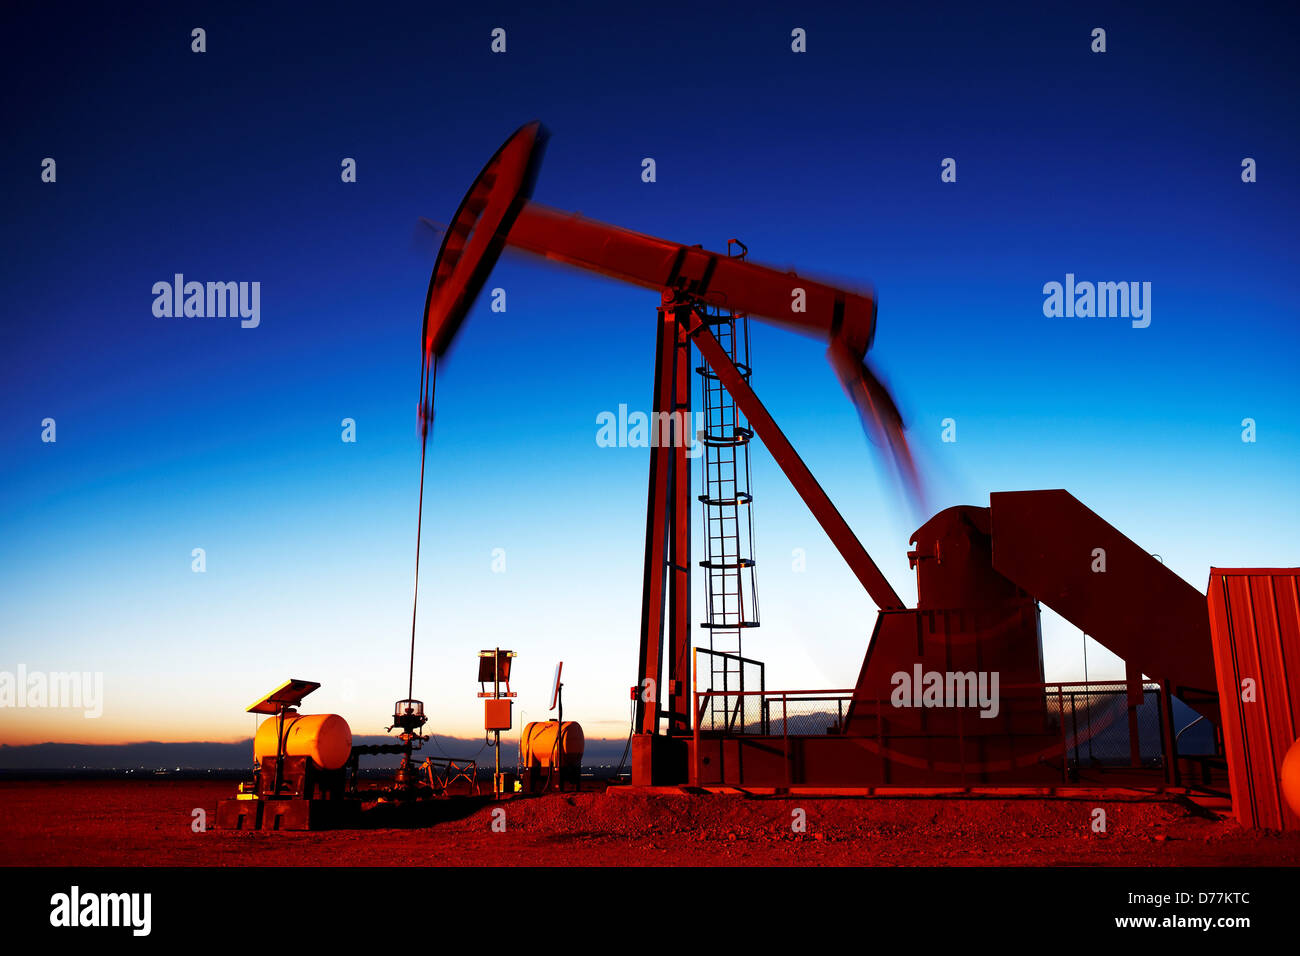 Oil well pumpjack pump jack eastern plains Colorado dusk view Oil well developed hydraulic fracturing also known as Stock Photo